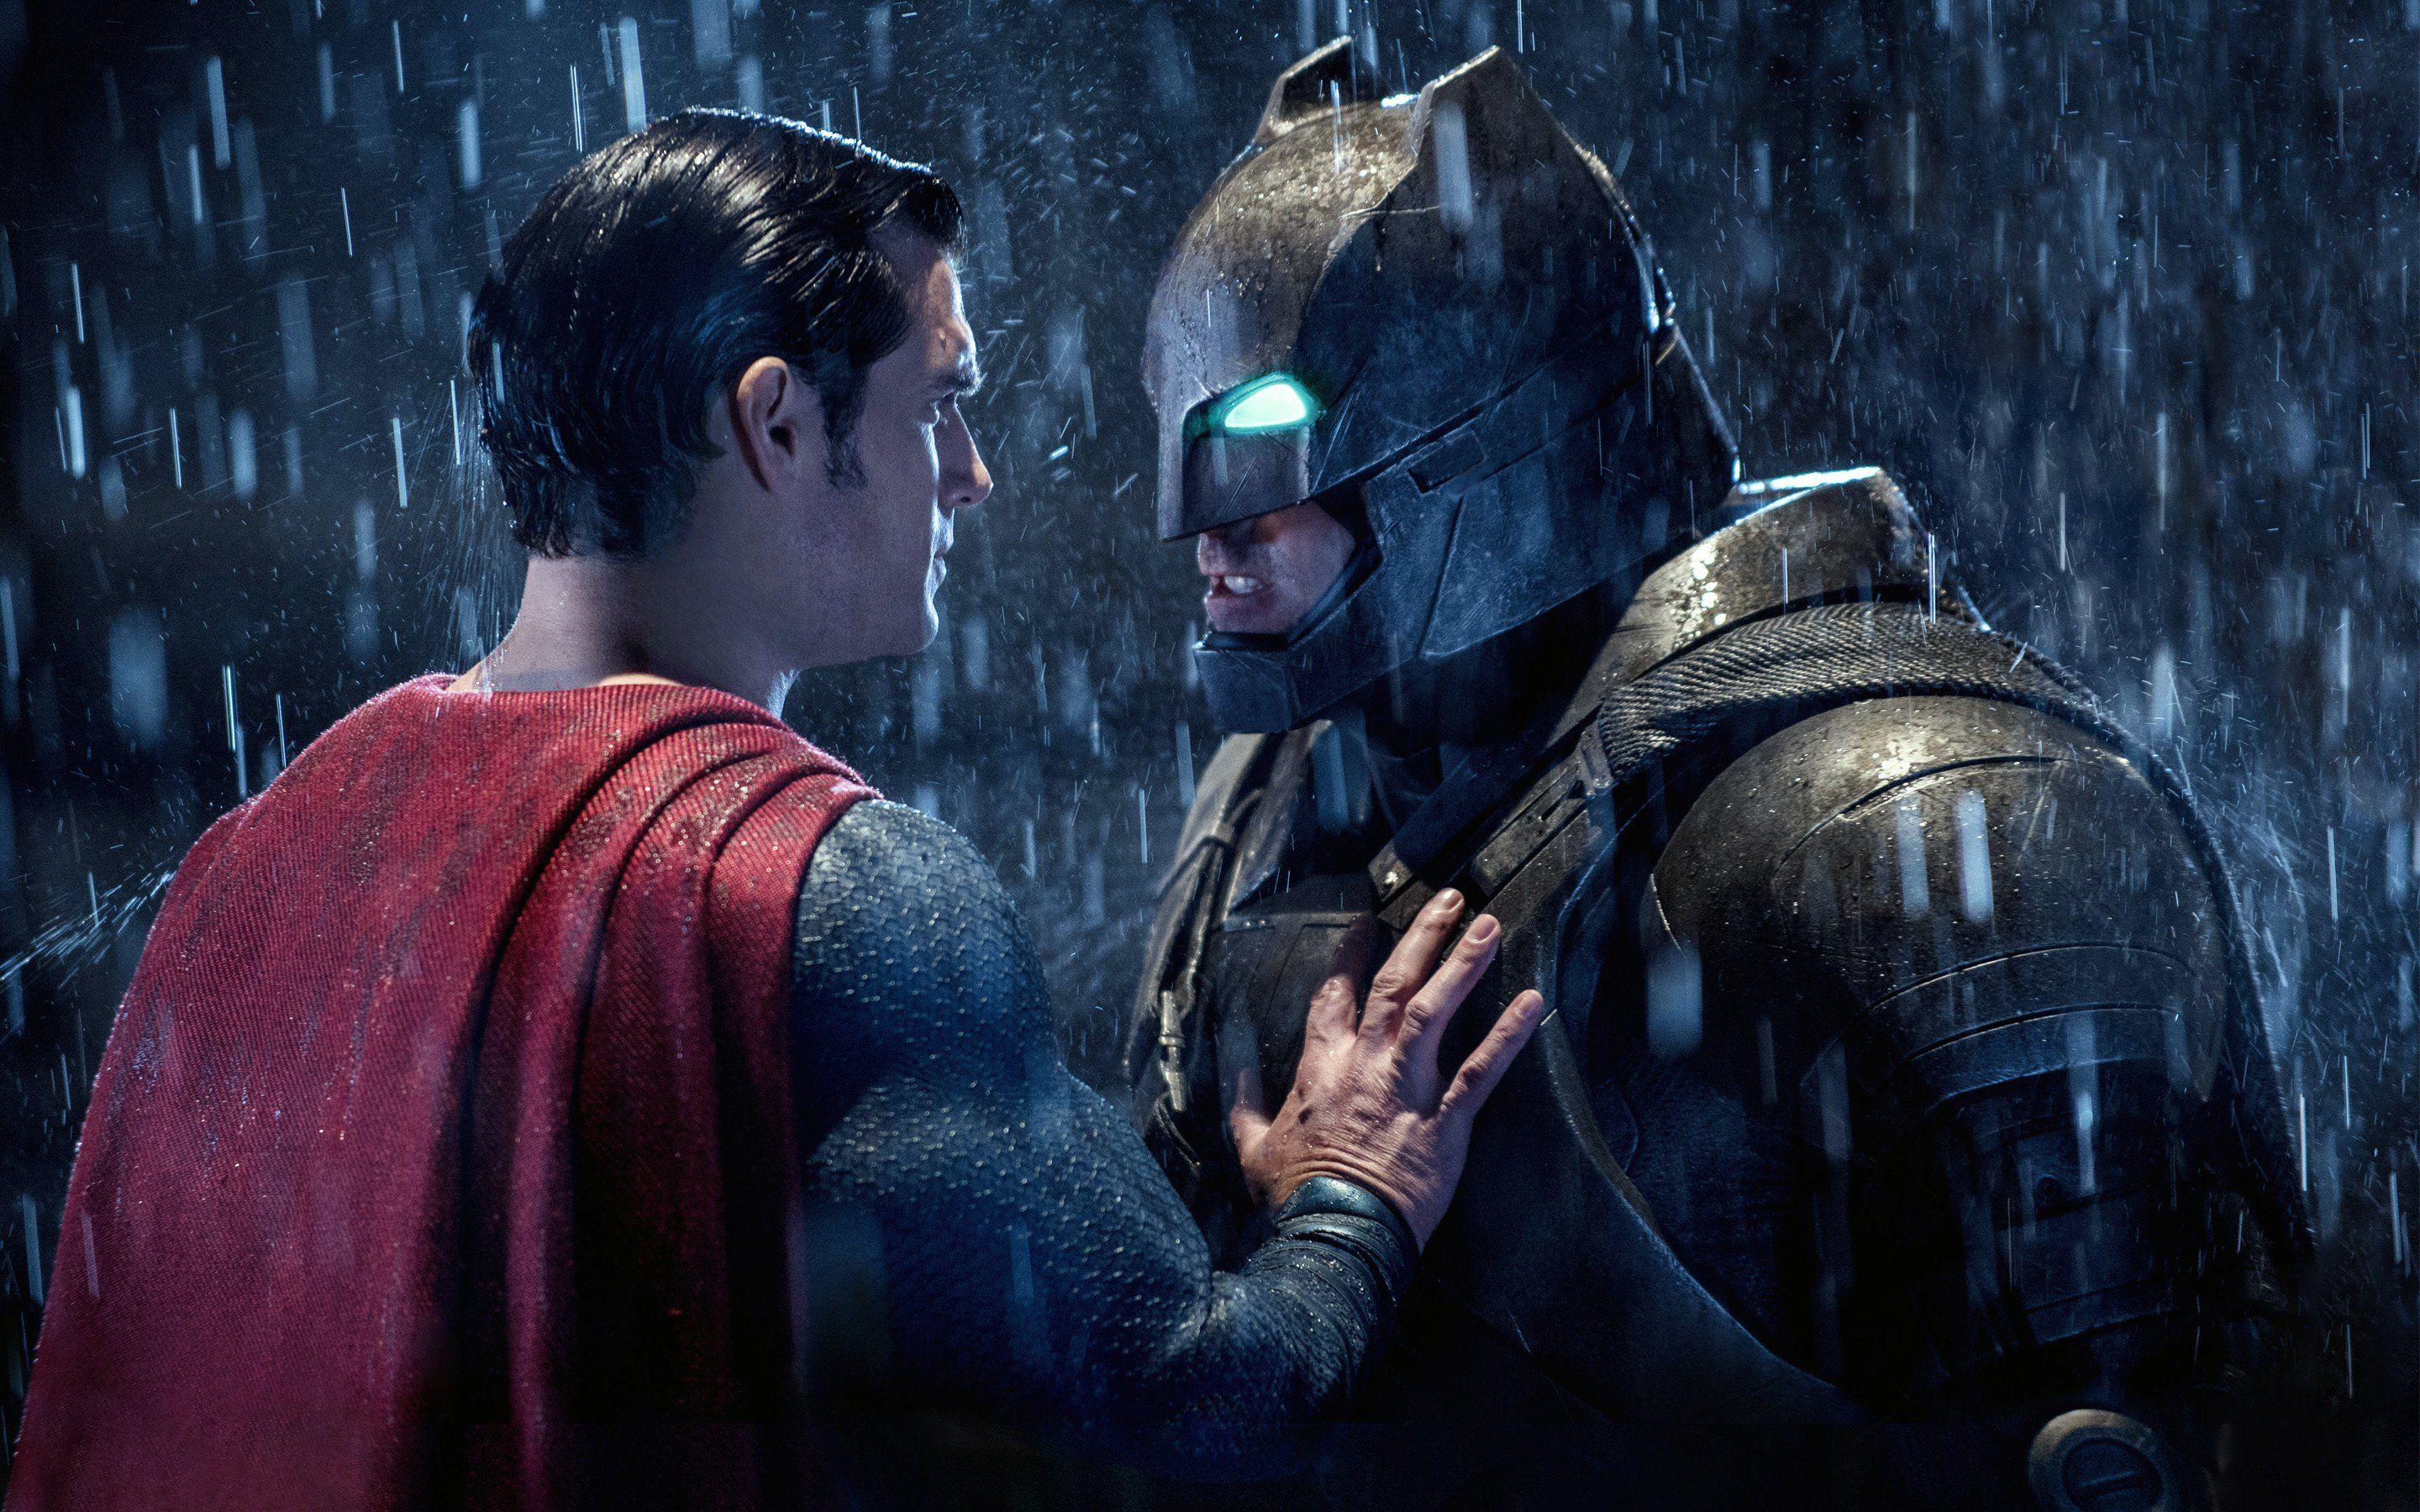 News From Earth 2: The Never Seen Zack Snyder Cut Of 'Batman V Superman'